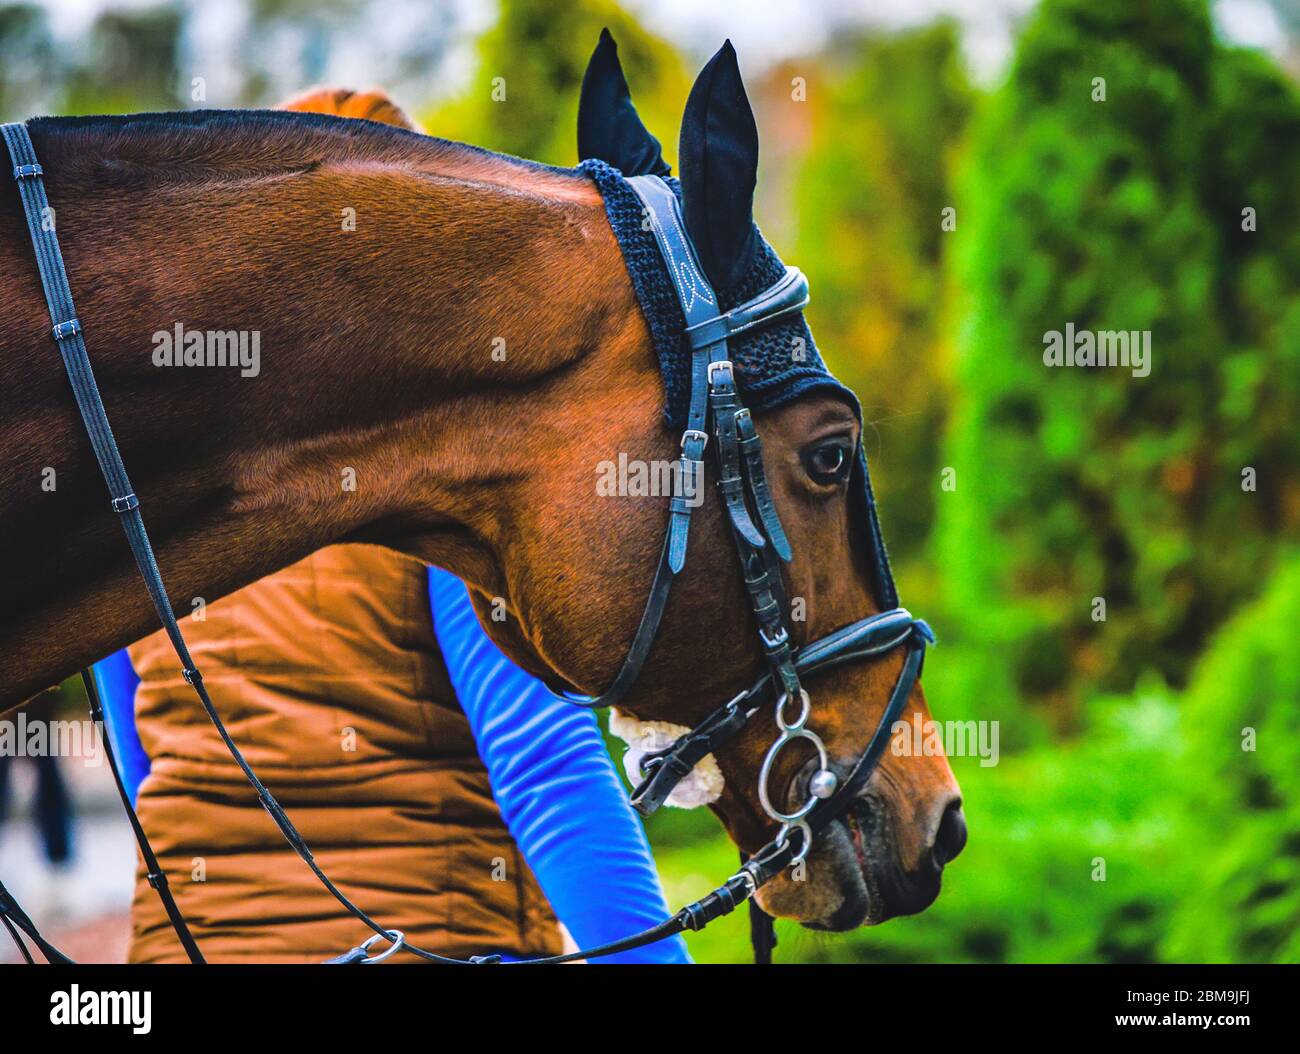 The head is chestnut beautiful horse, wearing bridle, equestrian sports. Green blured trees as a background. Stock Photo